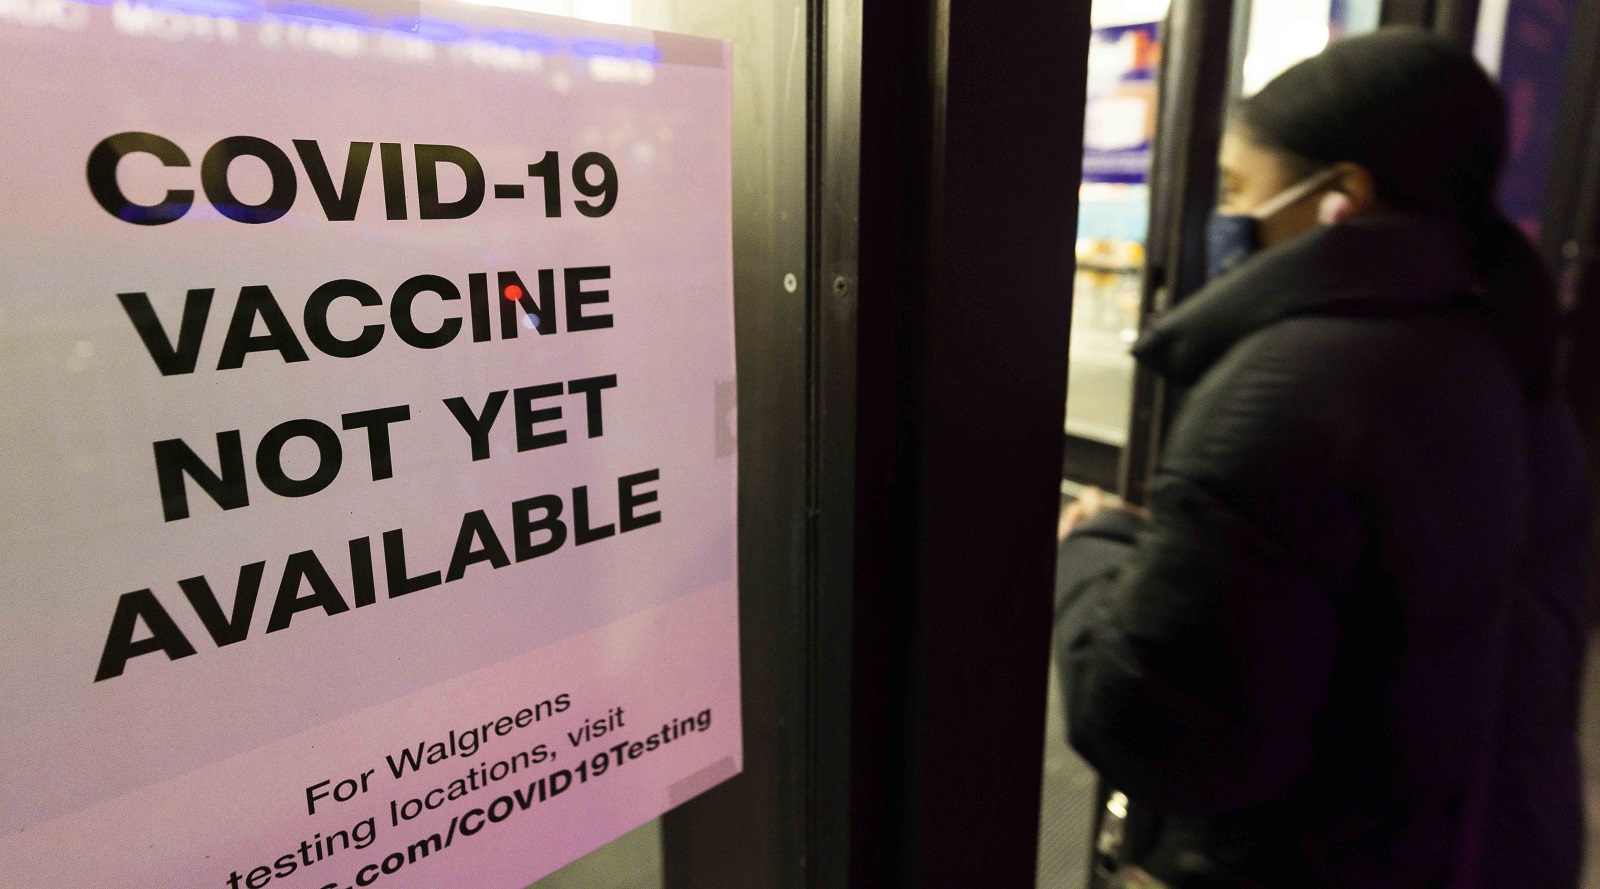 epa08856317 A person walks past sign informing customers about COVID-19 vaccine availability at a drug store in New York, USA, 01 December 2020.  EPA/JUSTIN LANE